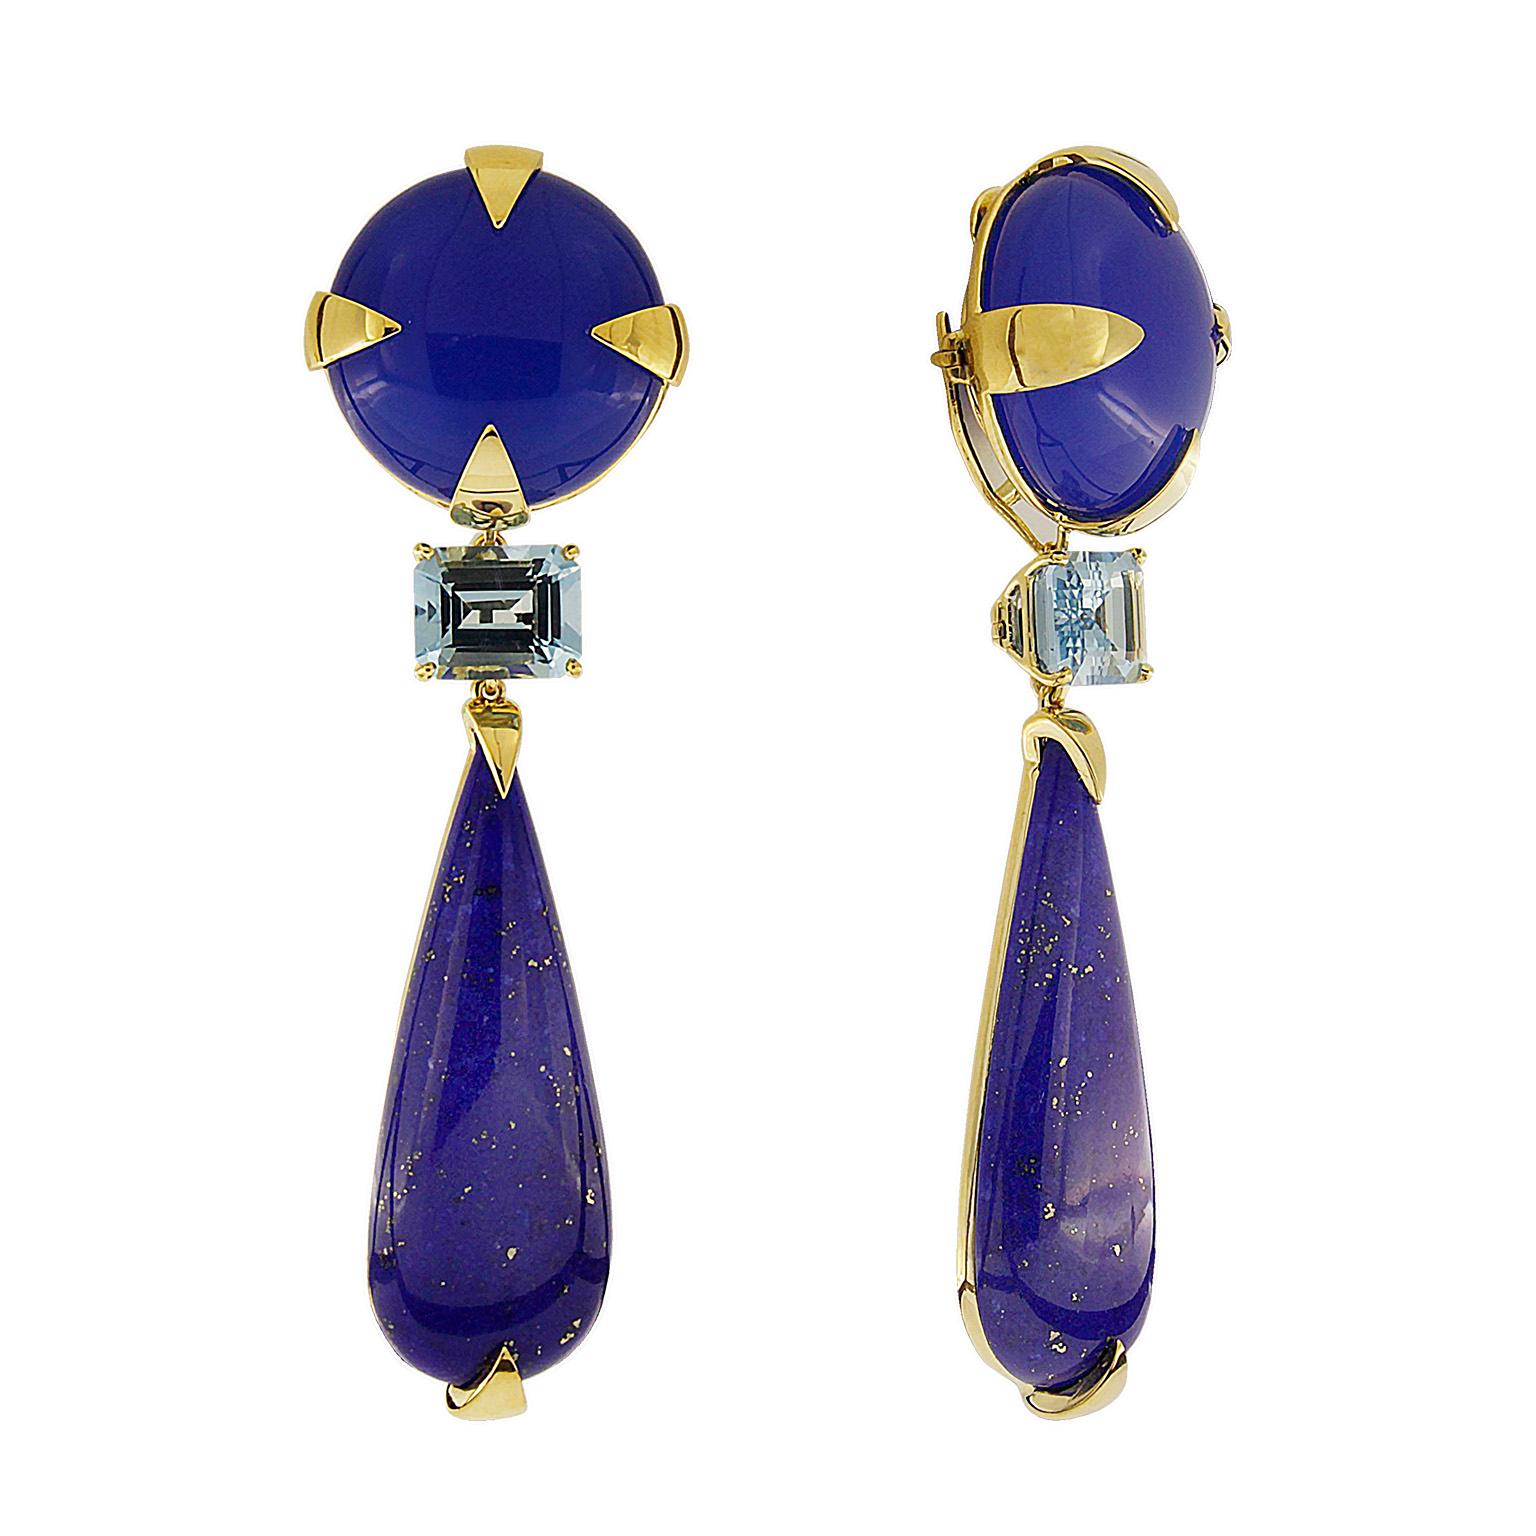 Blue upon blue make these drop earrings, special. Their bases are blue agates carved into rounds. Triangular 18k yellow gold prongs serve as mountings and accent. Underneath are elongated pear-shaped lapis lazuli, speckled in gold. Between the